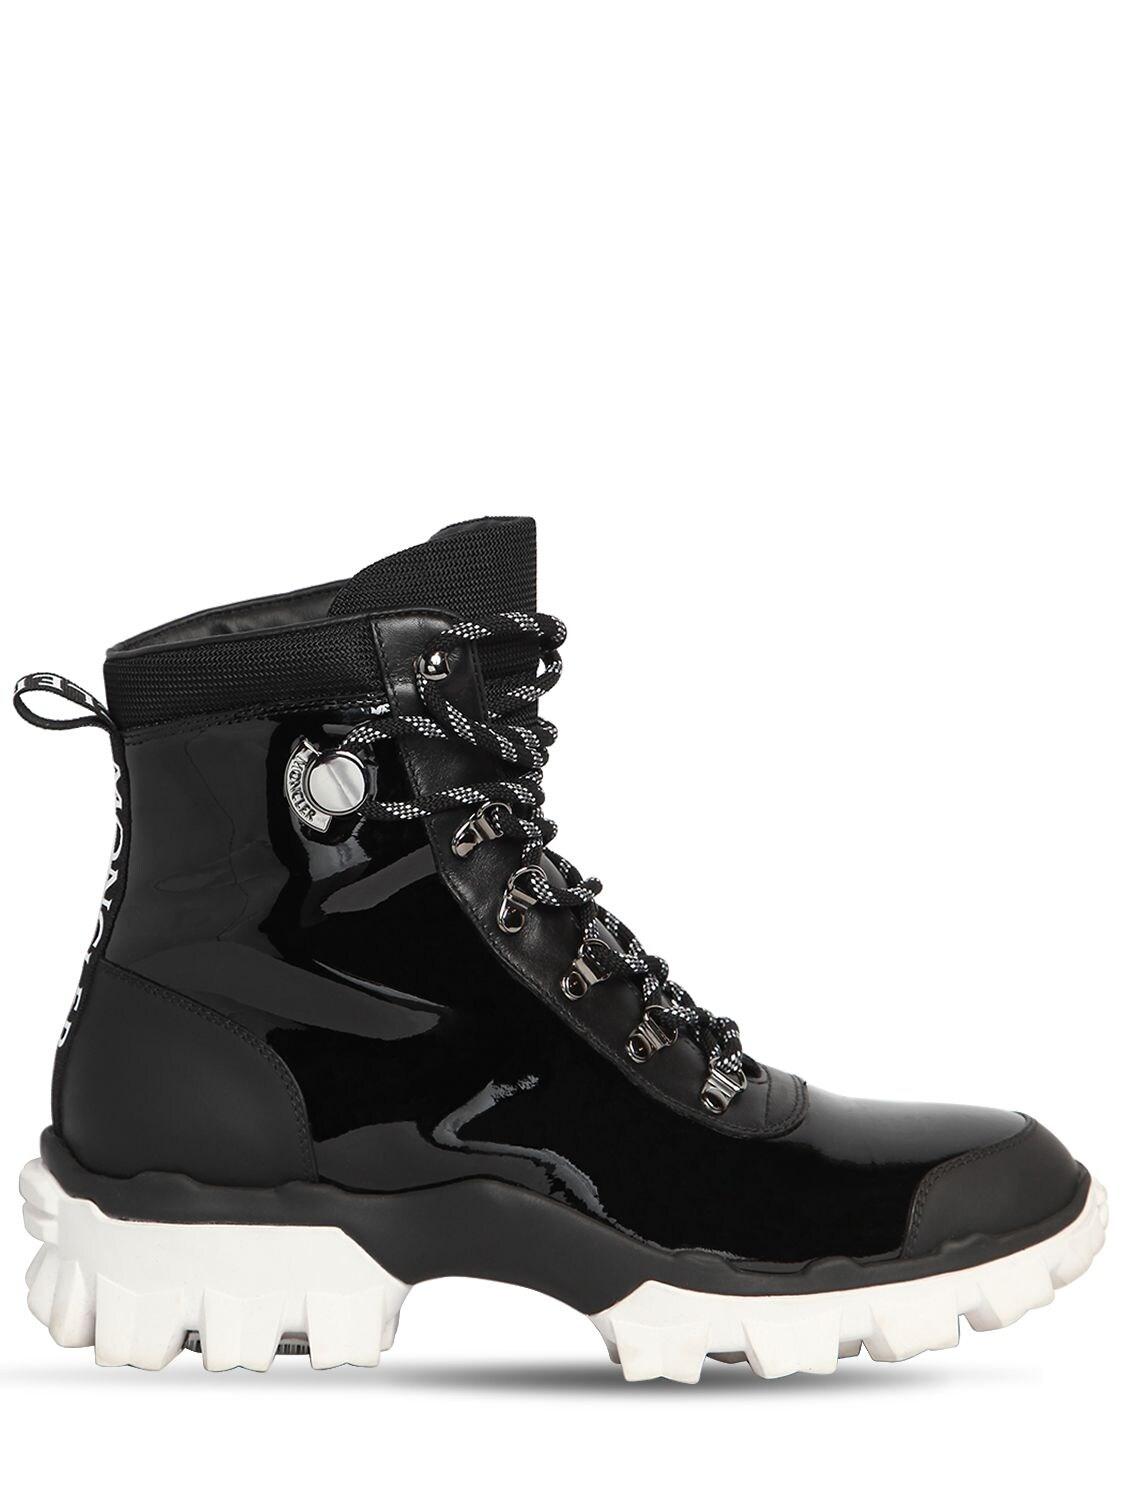 Moncler Leather Helis Boots in Black - Lyst